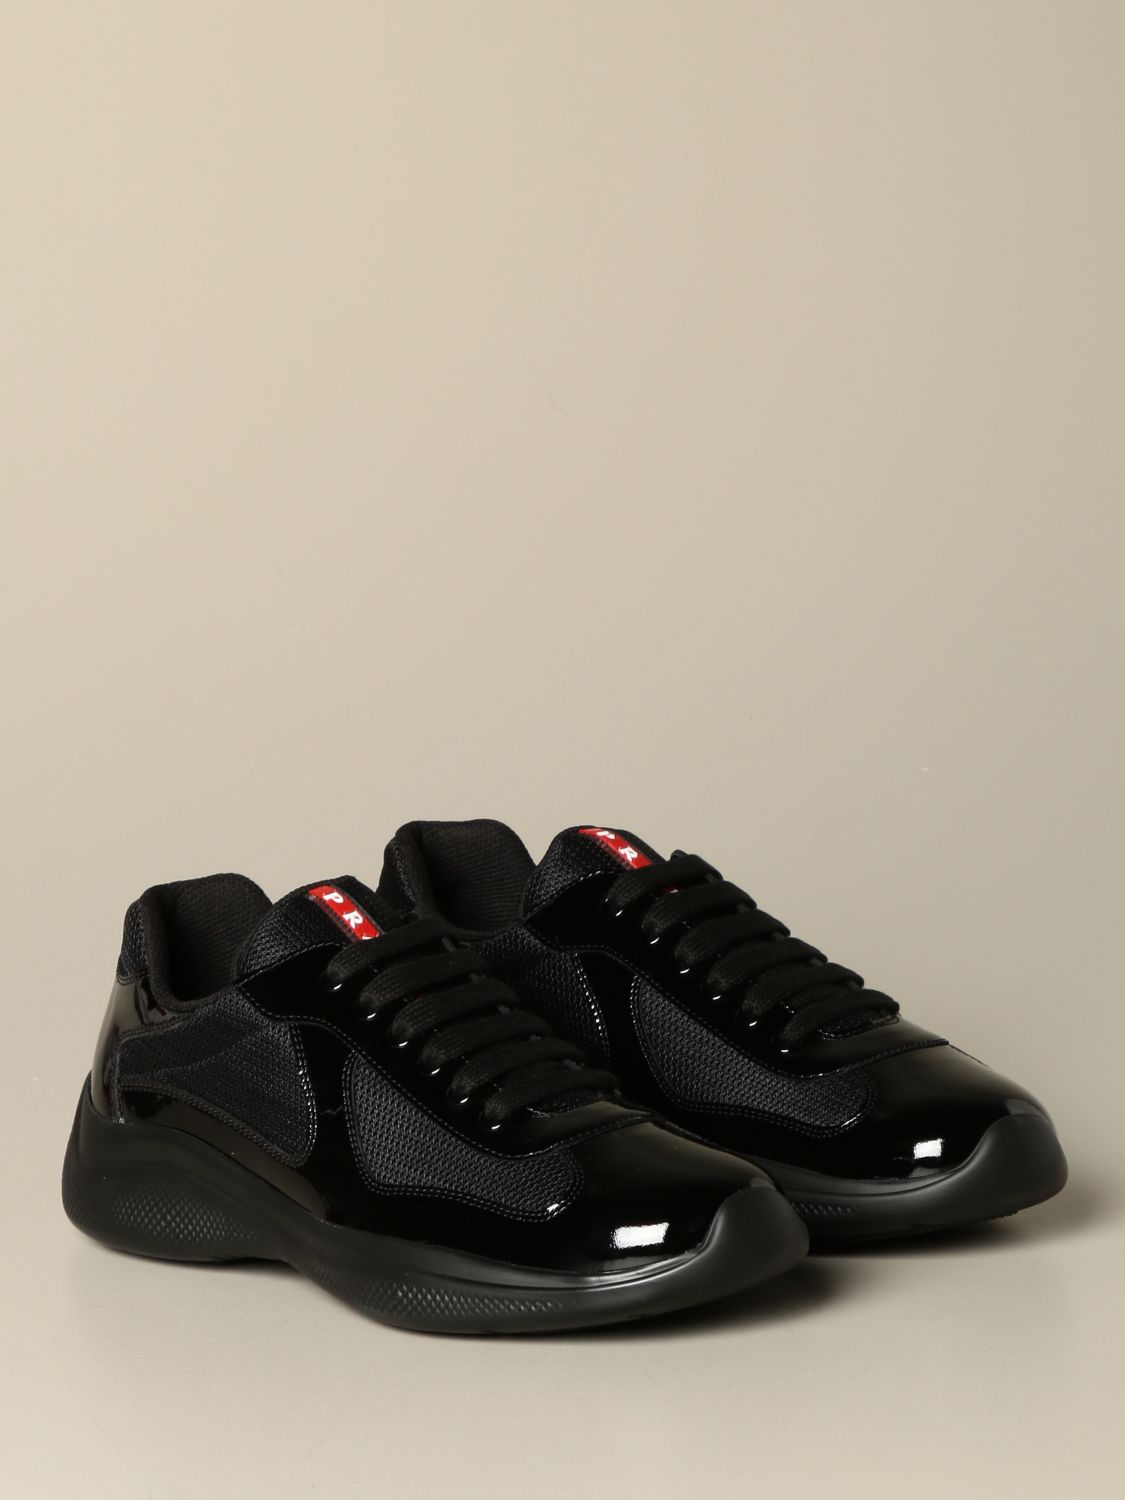 prada patent leather and technical fabric sneakers